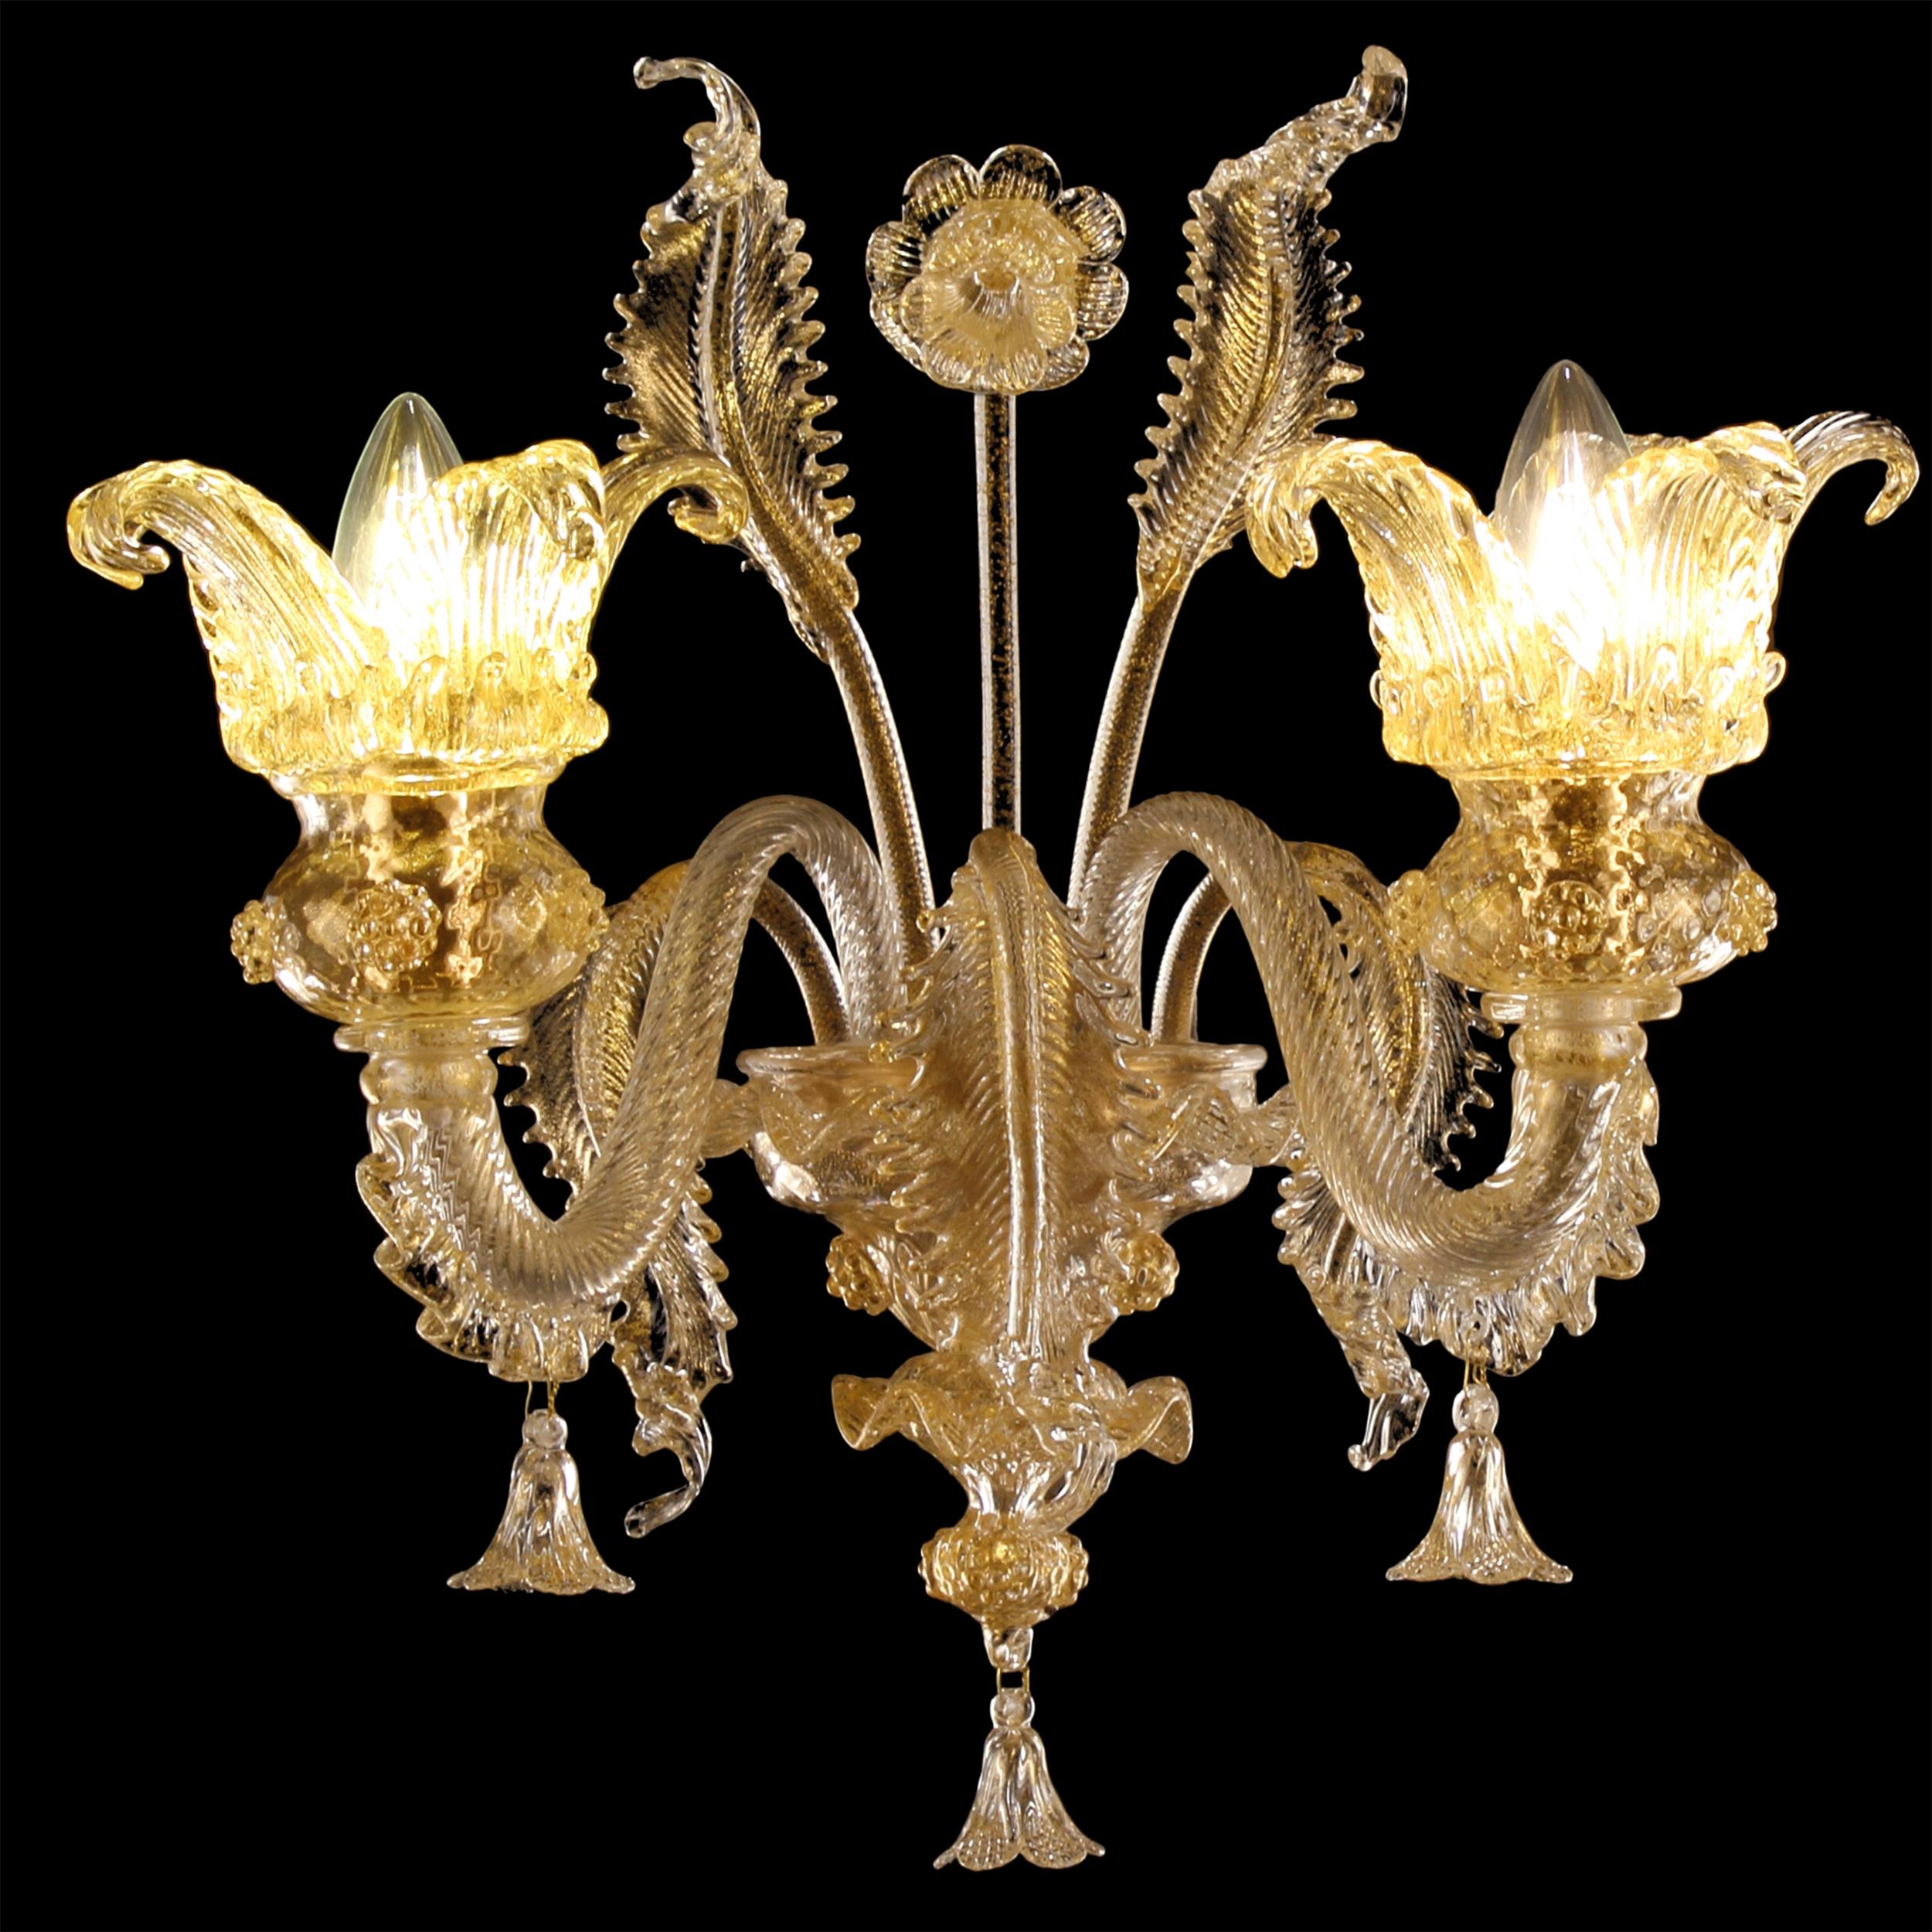 Luxury sconce 2 arms golden leaf Murano glass Golden Century87 by Multiforme
The collection Golden Century 087 by MULTIFORME lighting is a tribute to the magic and the richness of the XVIIIth Venice. It presents the same structure of the Golden